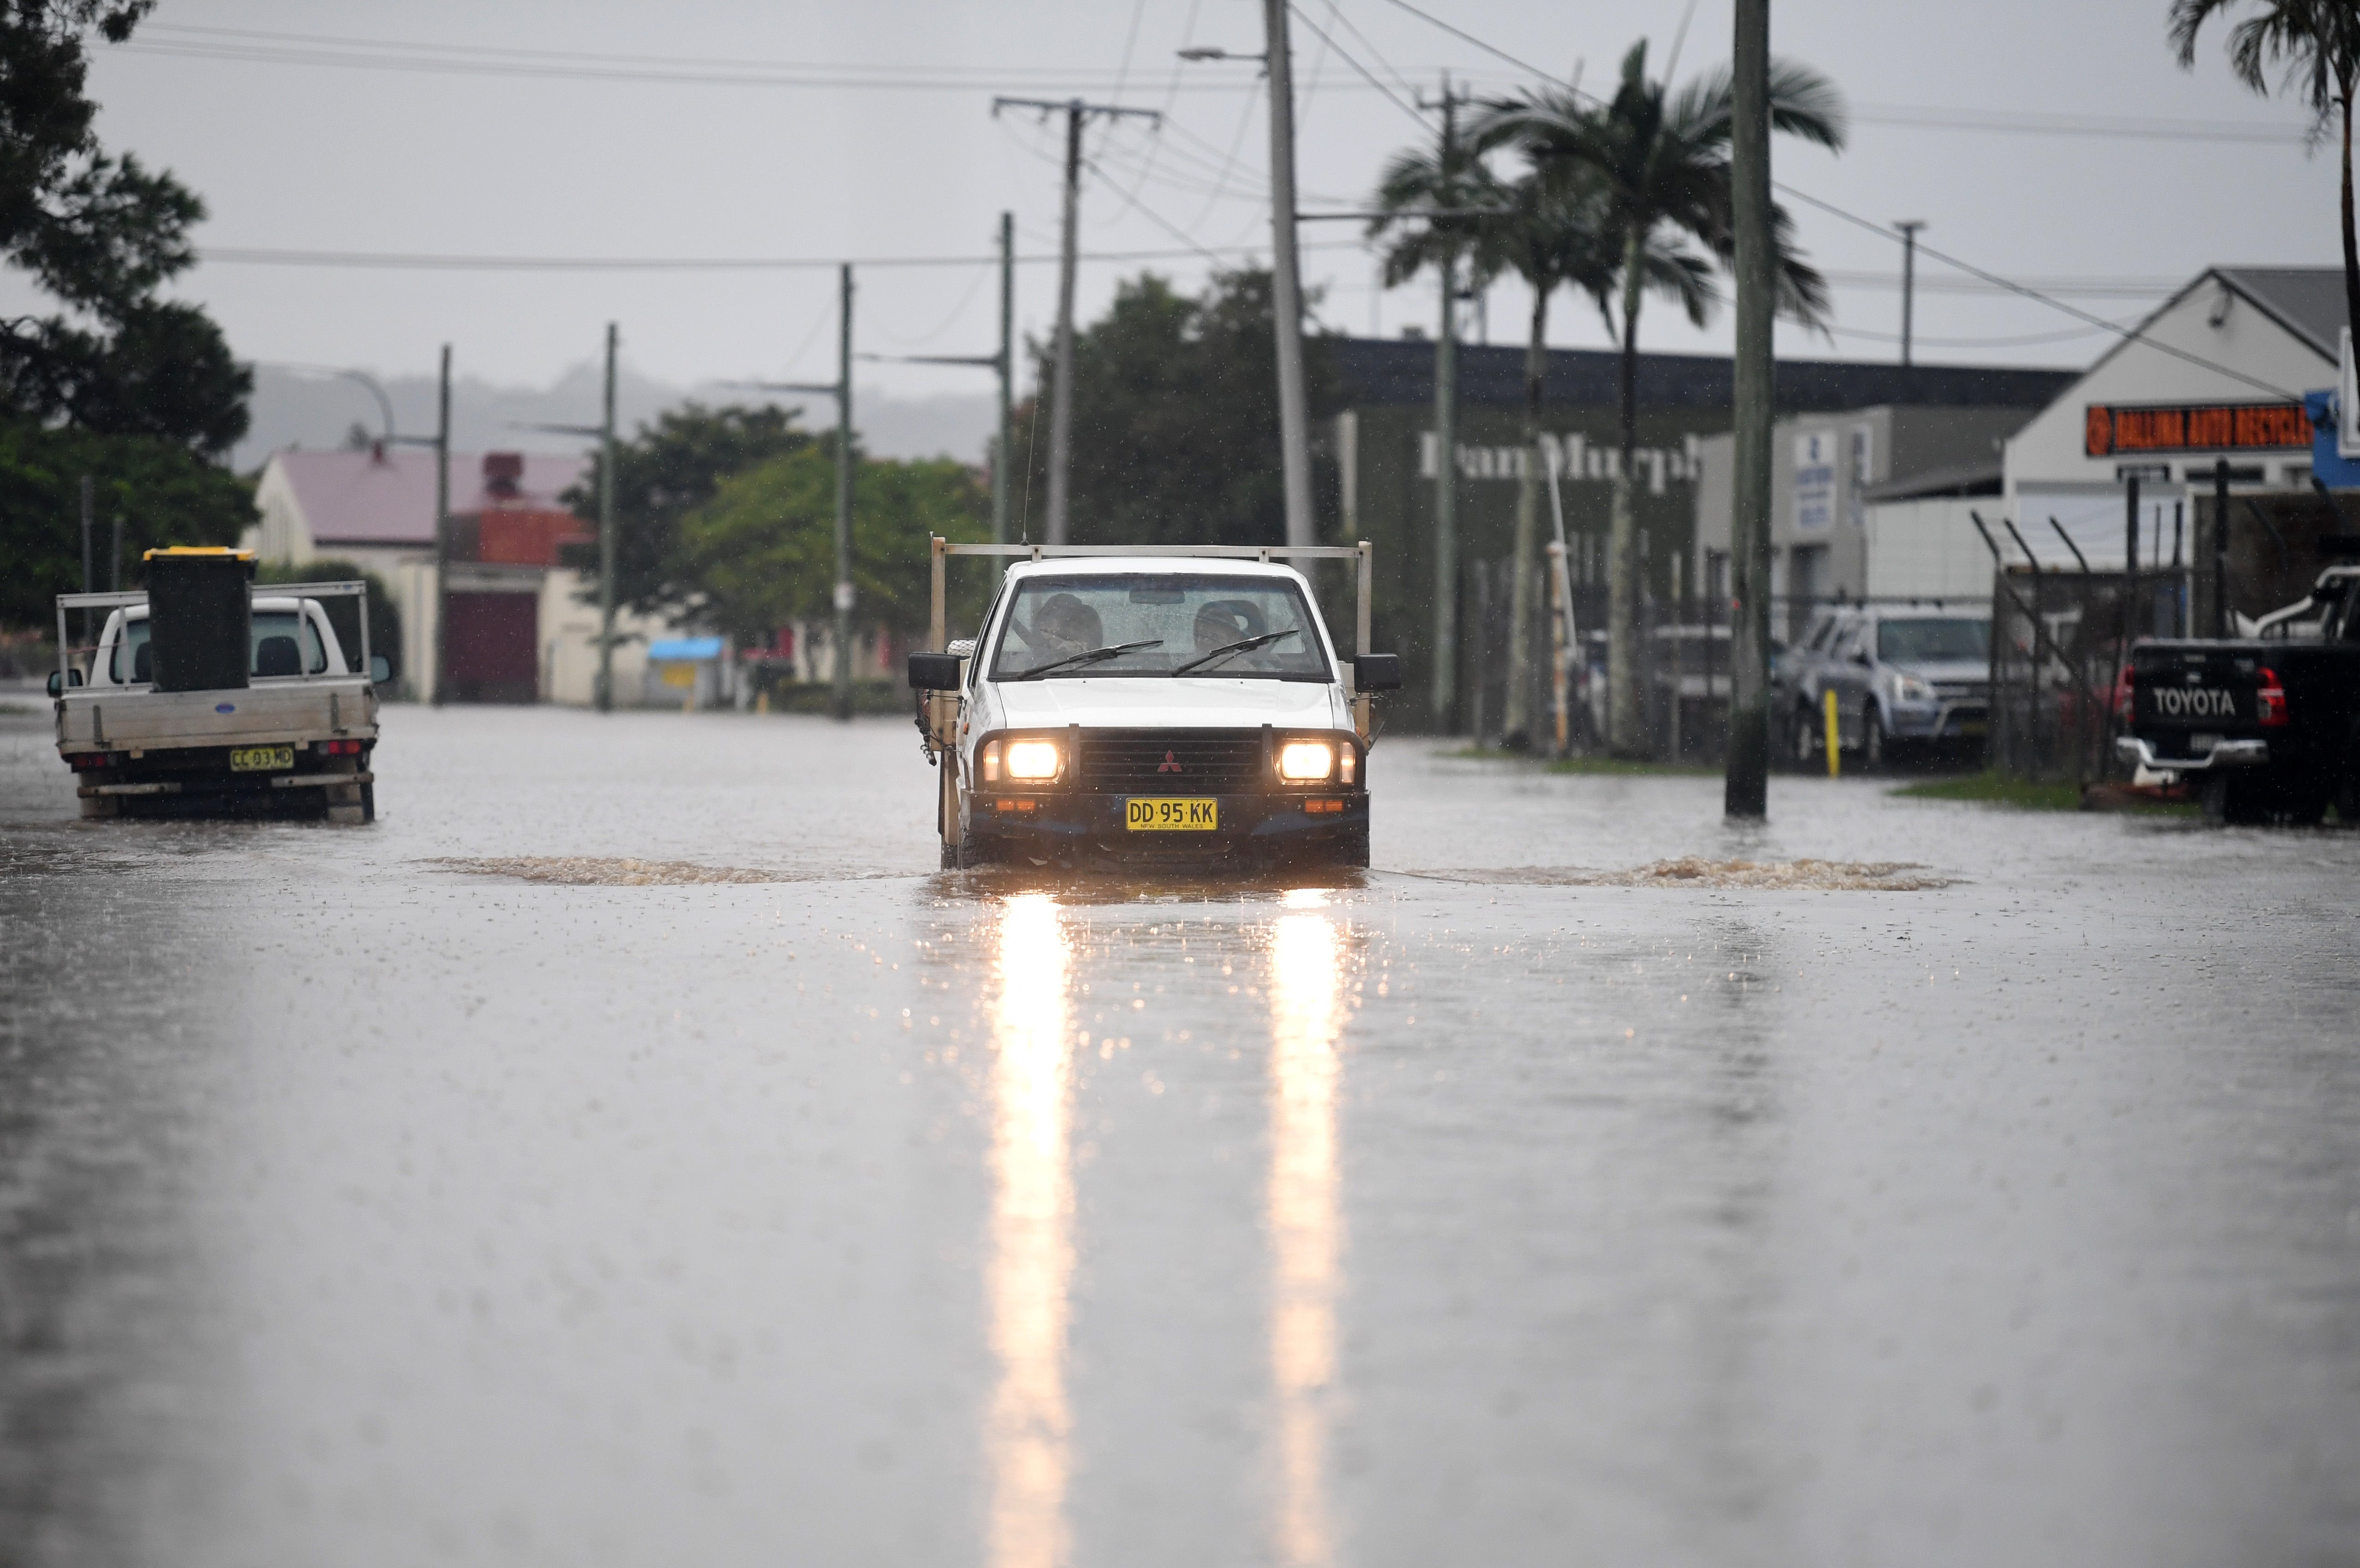 Flooding is also an increasingly frequent problem for roads